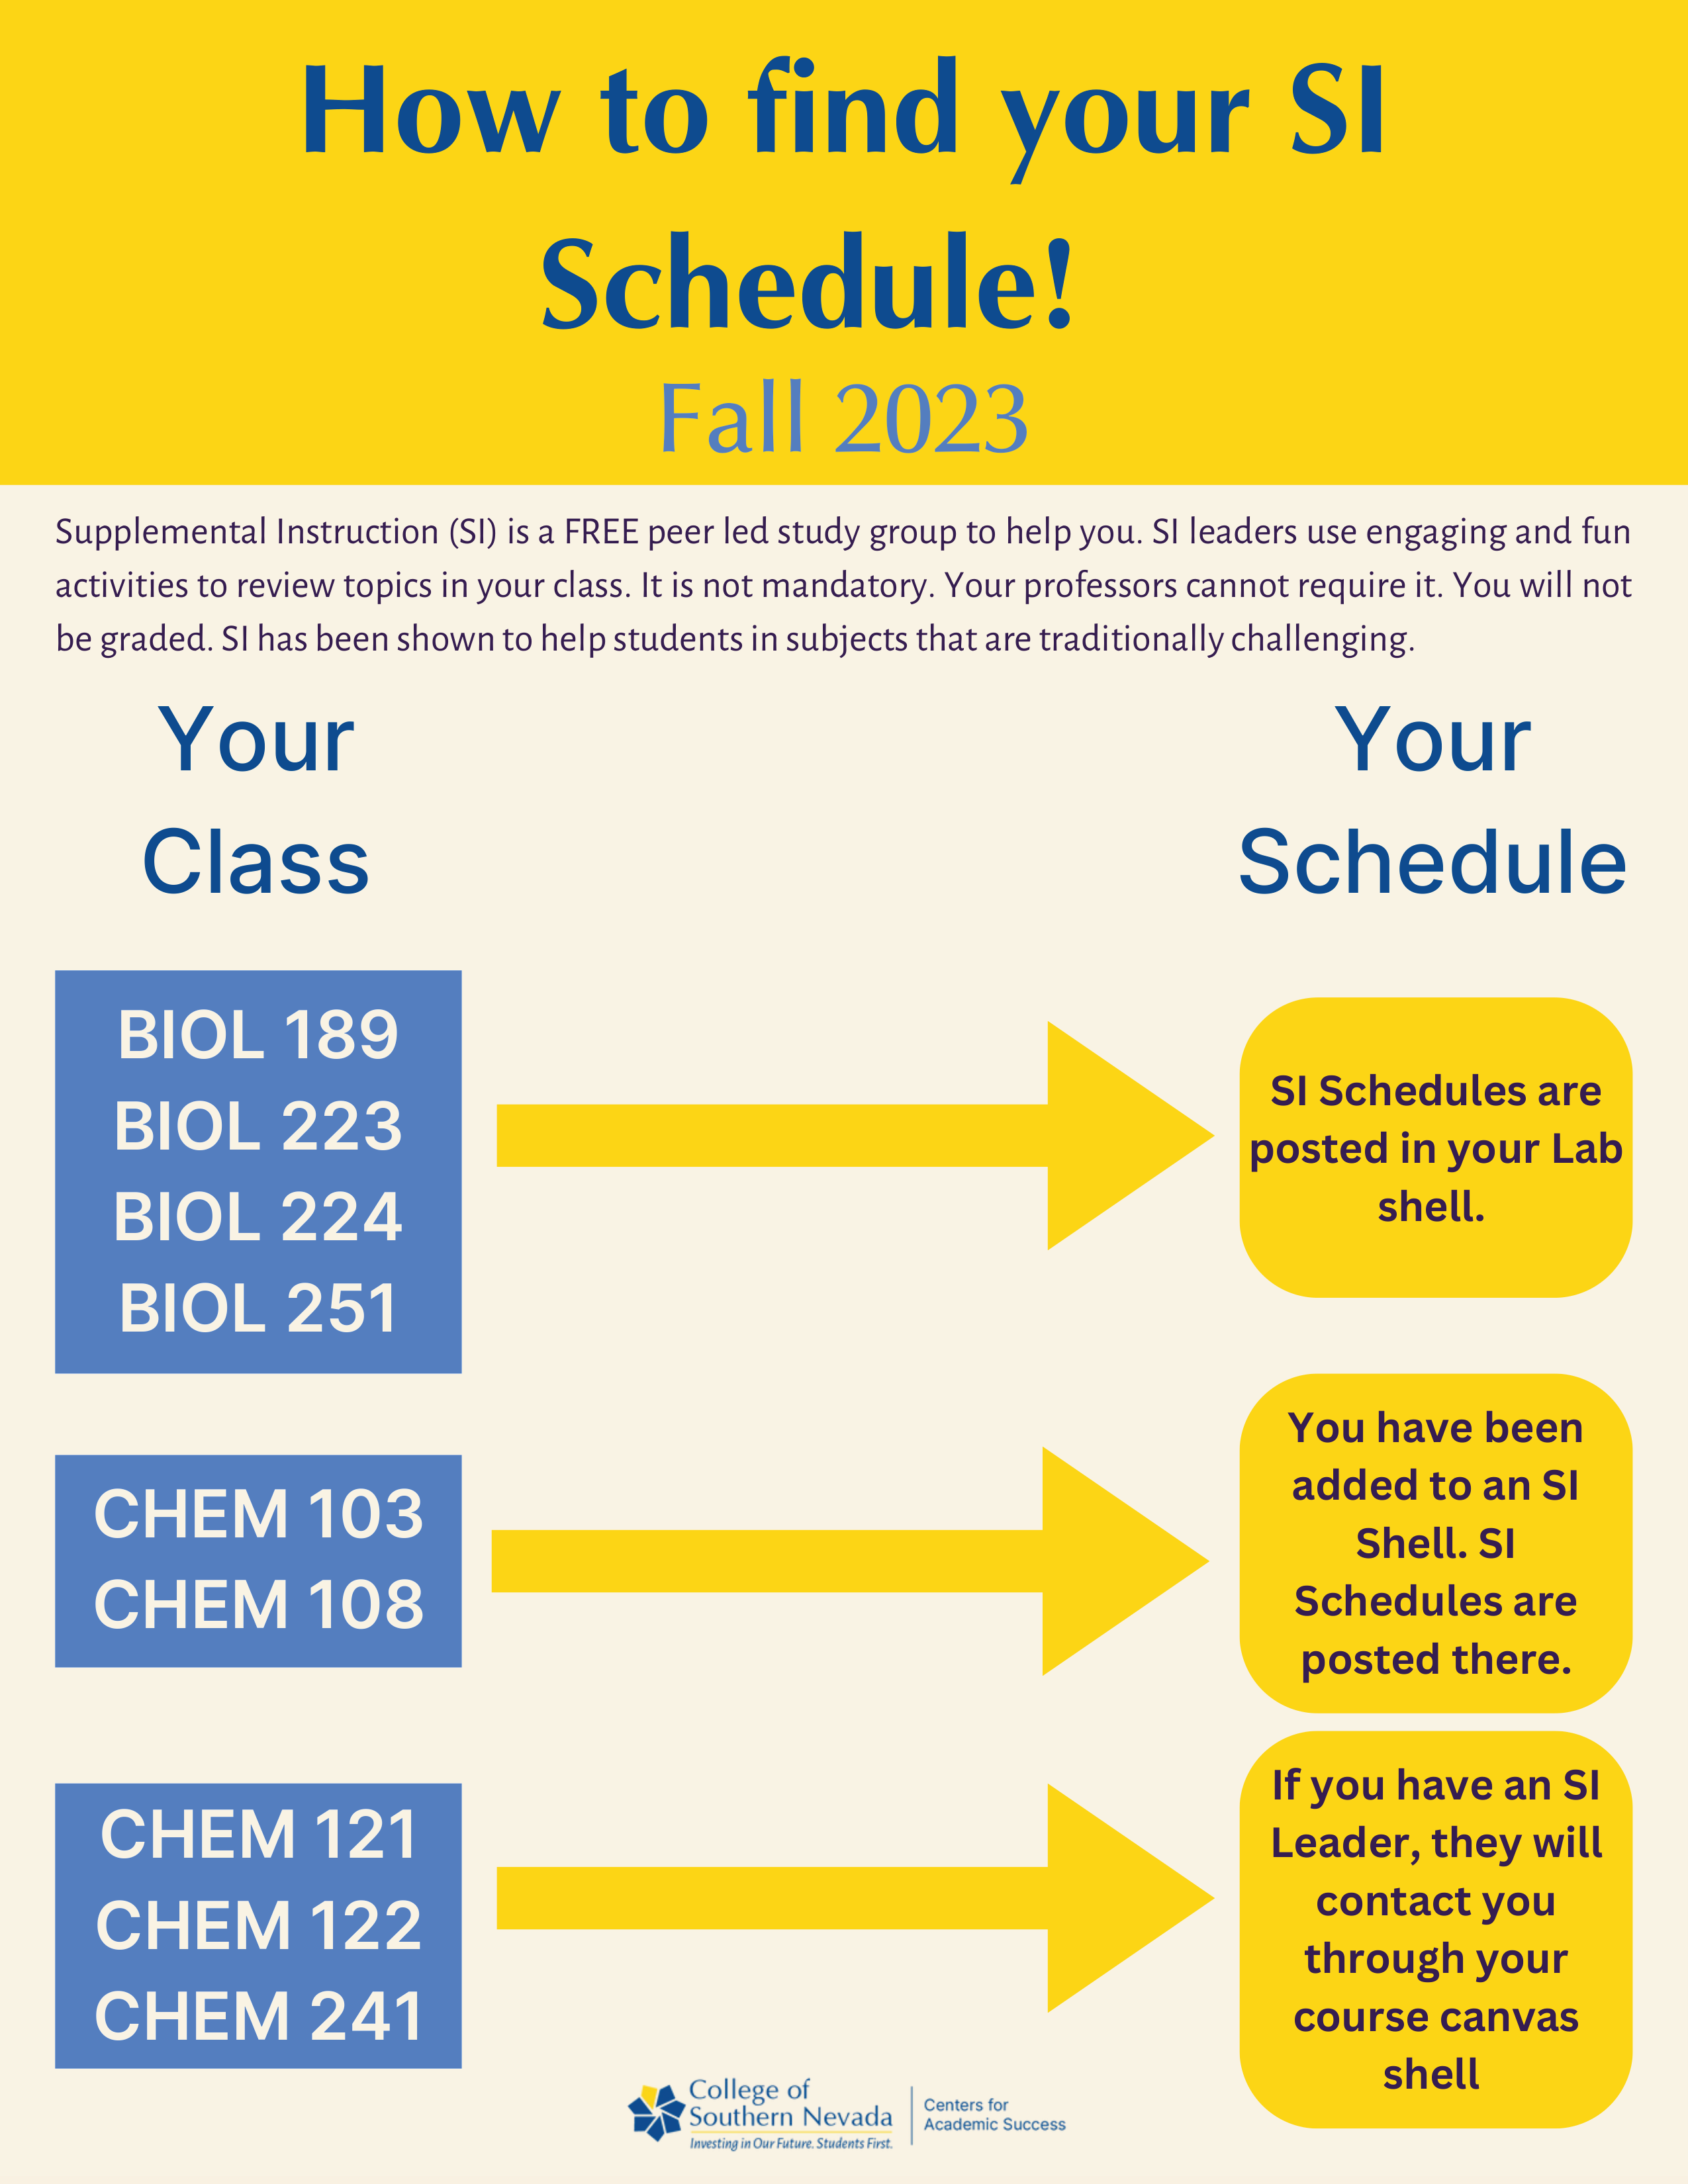 How to find your SI schedule